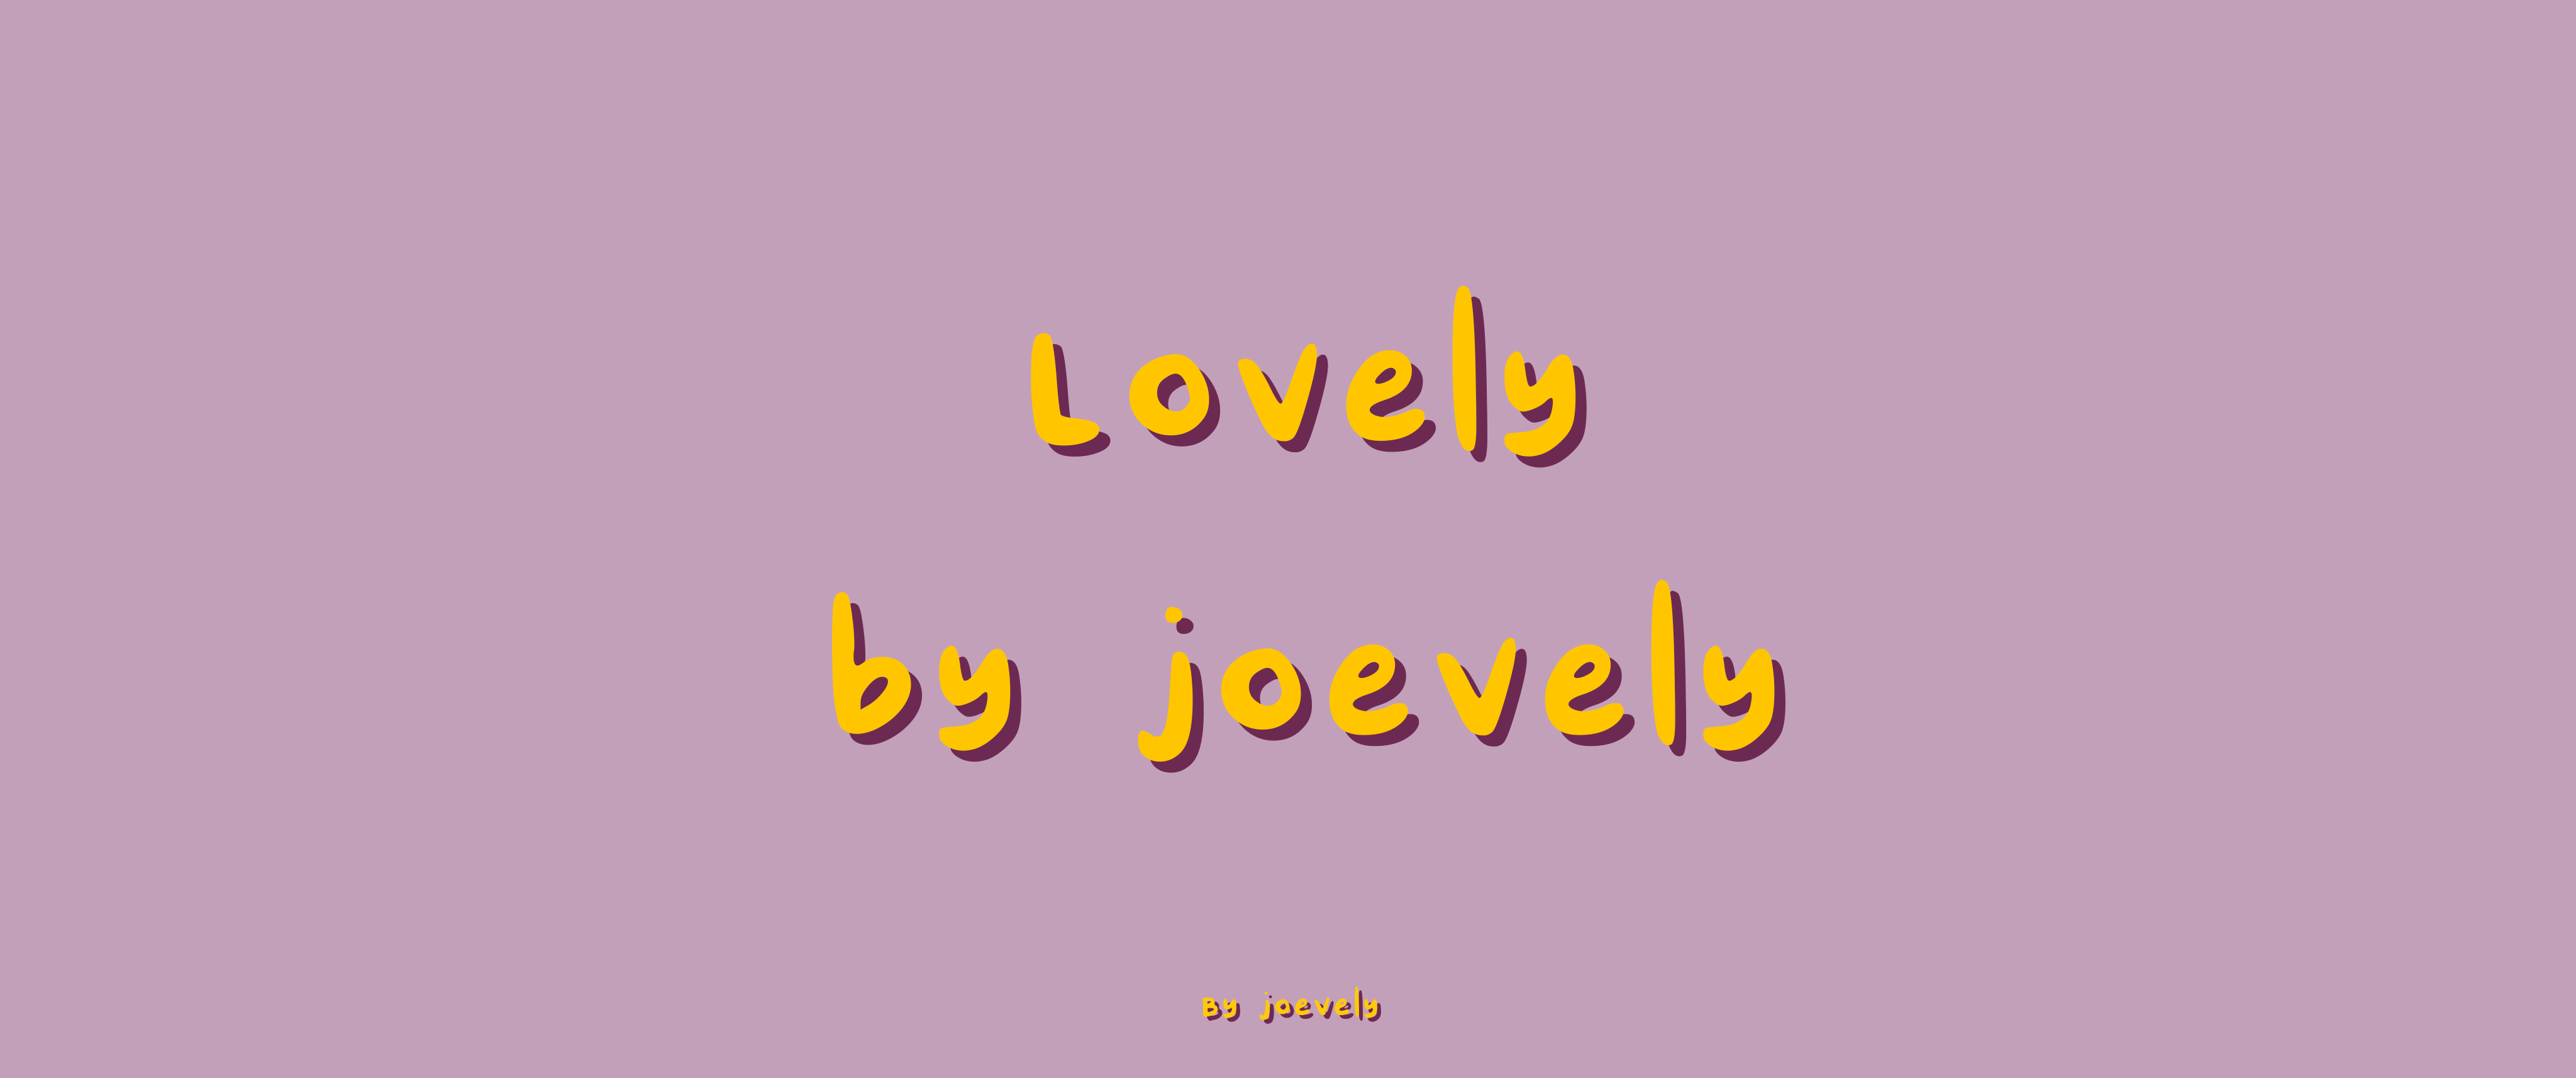 Lovely By Joevely